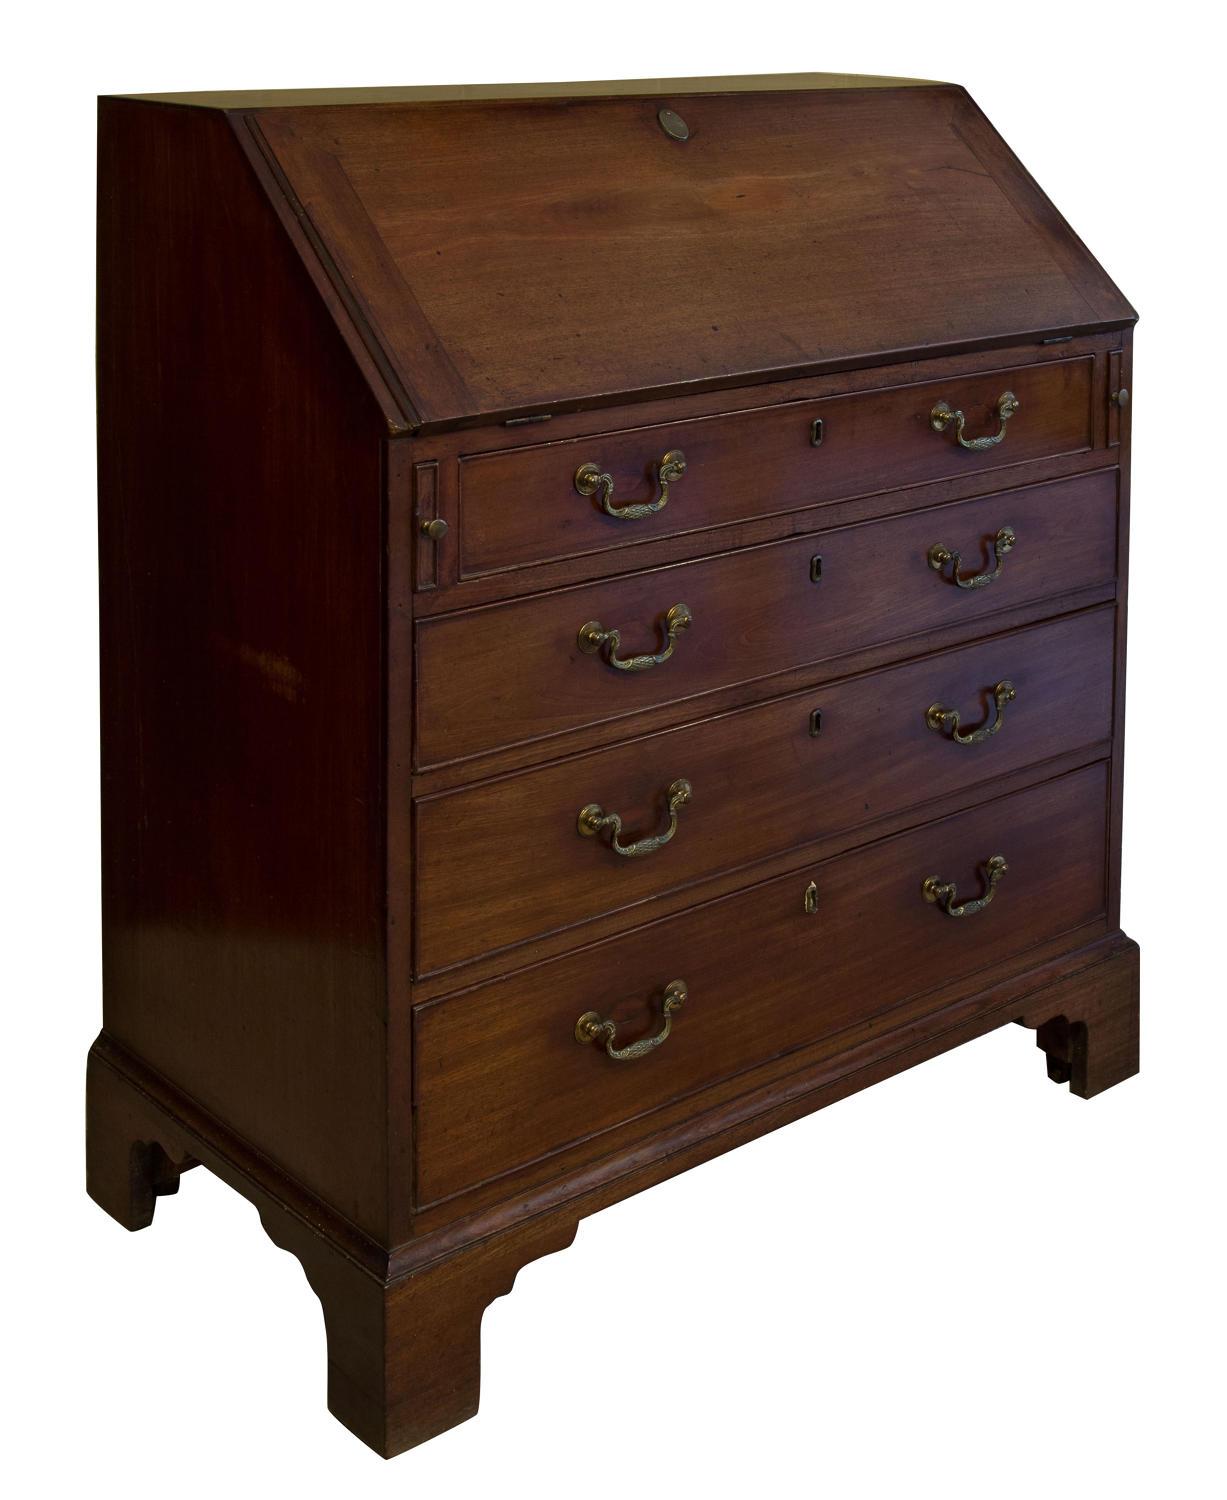 A George III mahogany 4-drawer bureau of good color. Swan neck drop handles, well fitted interior and original feet,

circa 1780.